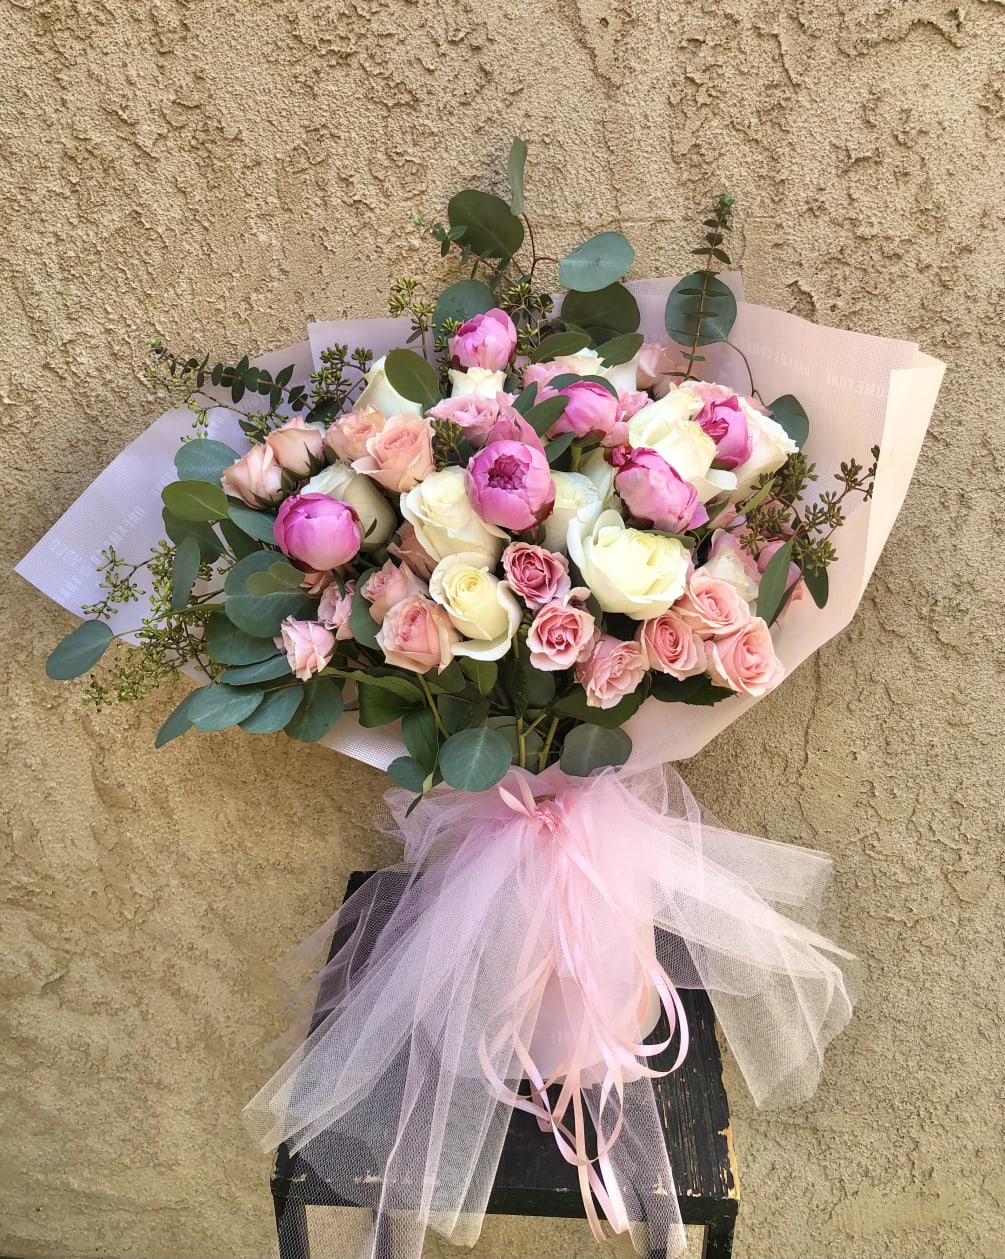 Beautiful pink and white arrangment featuring peonies (seasonal), white and pink roses